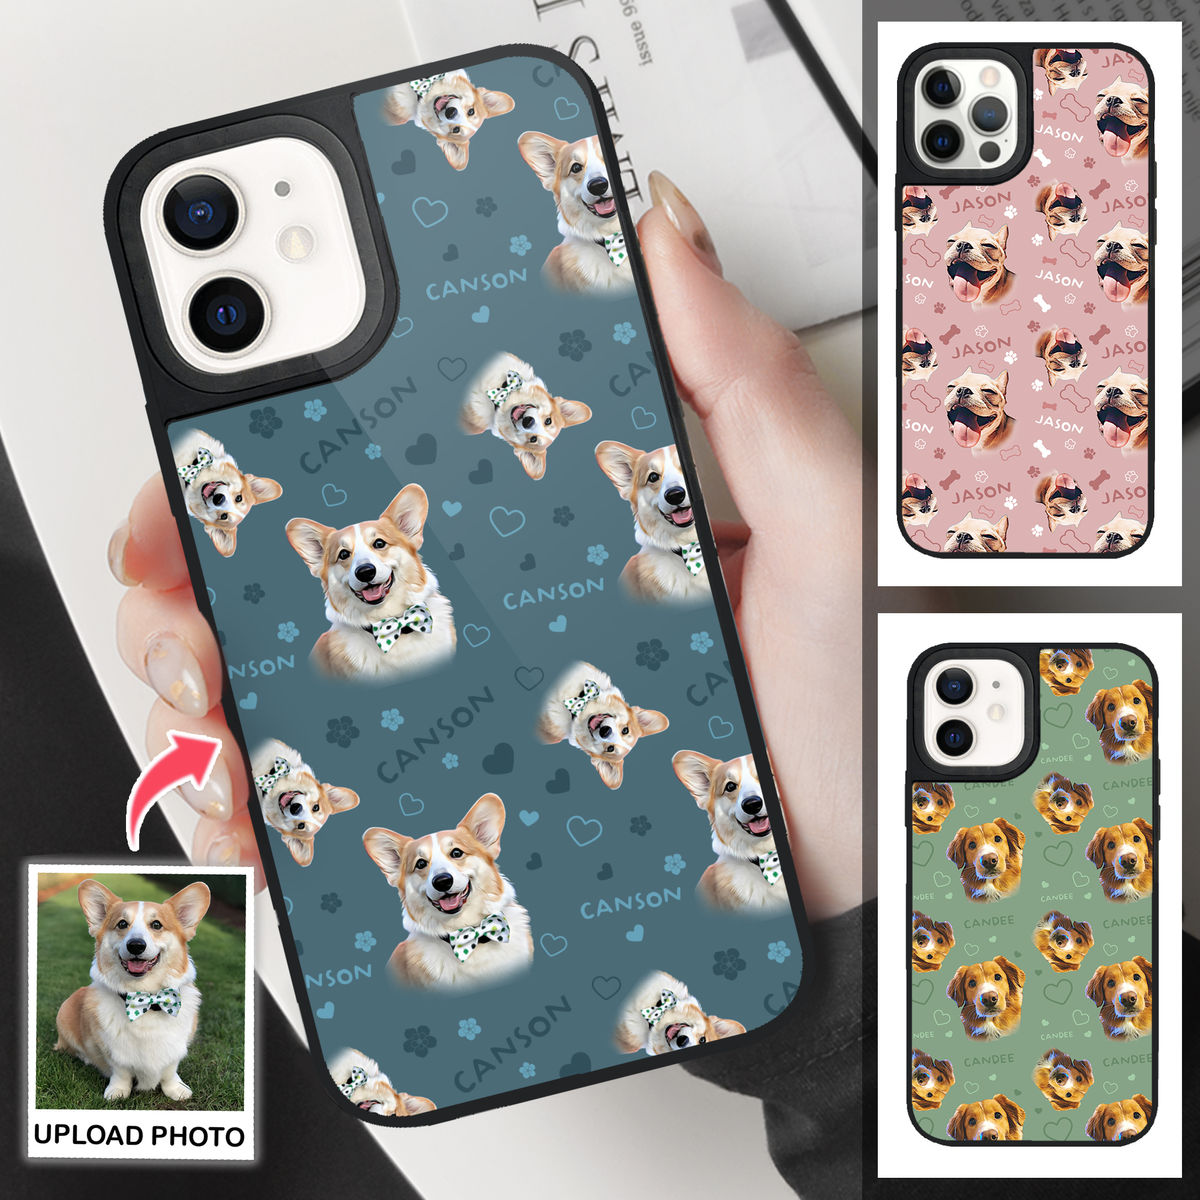 Custom Phone Case From Photo - iPhone Case - Pet Lover Gifts - Dog Portrait Pattern - Digital Oil Painting  (B)